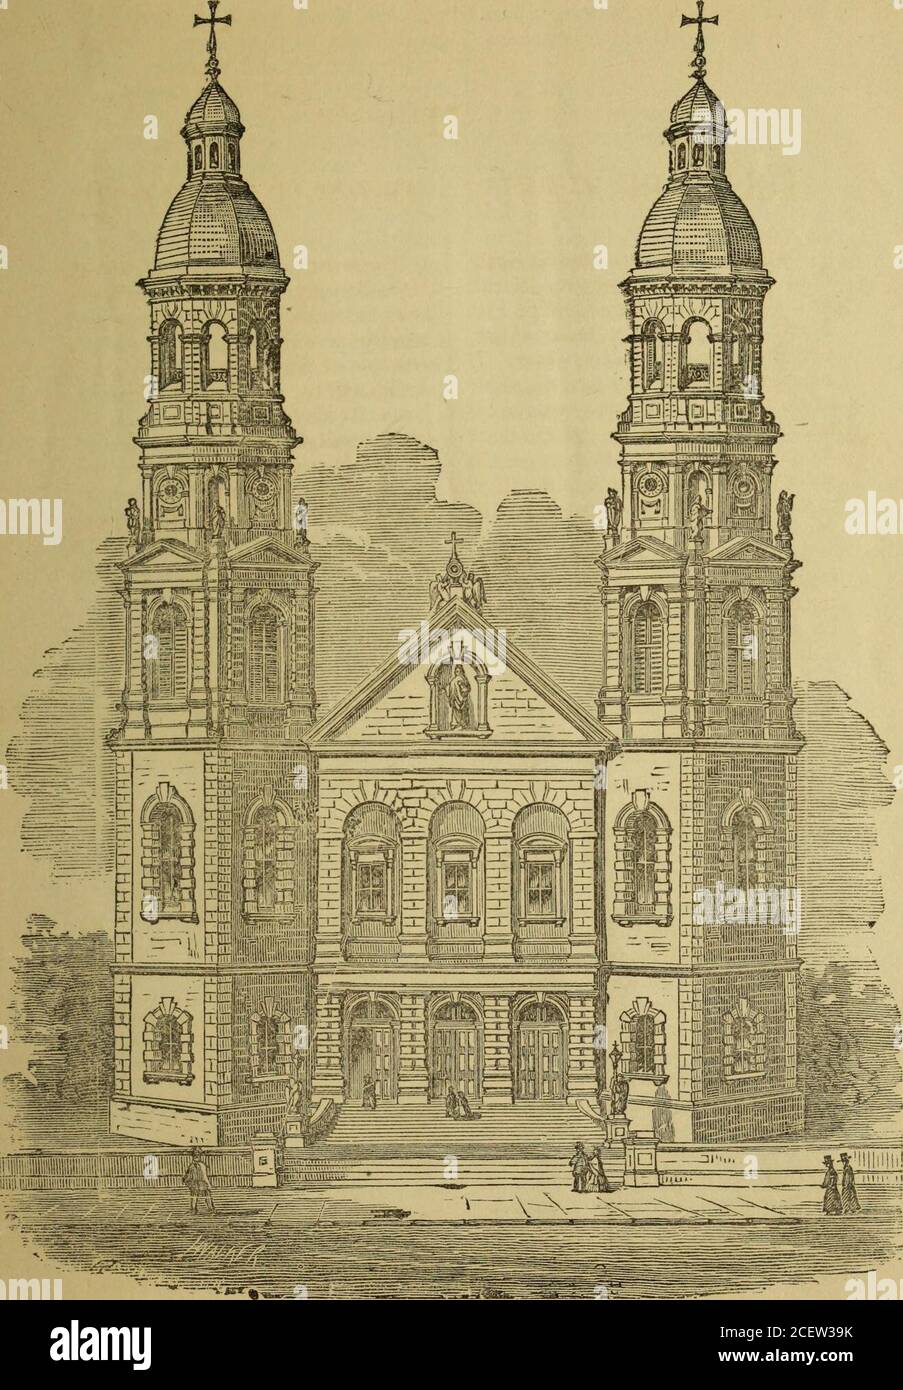 . College Ste. Marie et Eglise du Gesu. dertook the work ;on St. Josephs day, 1864, (March 19),they began to prepare the site and afew weeks later building operationswere commenced. The plan of the church was furnished by that well known architect,Mr. Keely, of Brooklyn, N. Y. It isundoubtedly a high work of art, de-signed in imitation of the Churchof the Gesu, one of the finest Ba-silics of Rome. The Church was blessed and openedfor worship on the 3rd December,1865 (St. Francis Xavier day). Theservices on week days are at thesame hours as those of the other citychurches; on Sundays and Holyda Stock Photo